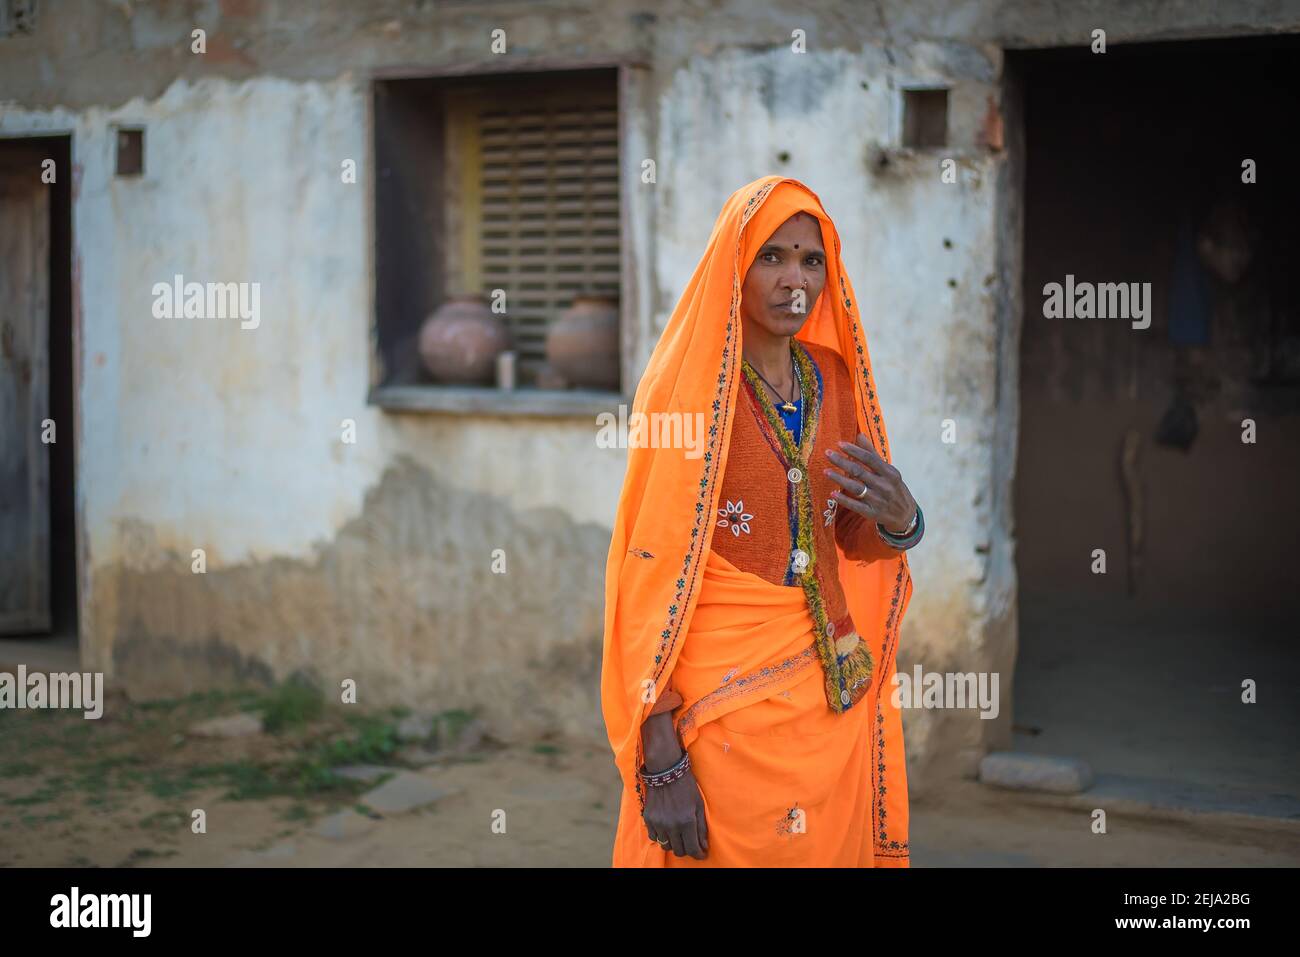 Rajasthan. India. 07-02-2018. Woman at her house in rural community. Women apart of taking care of children, they have an important role financial pro Stock Photo